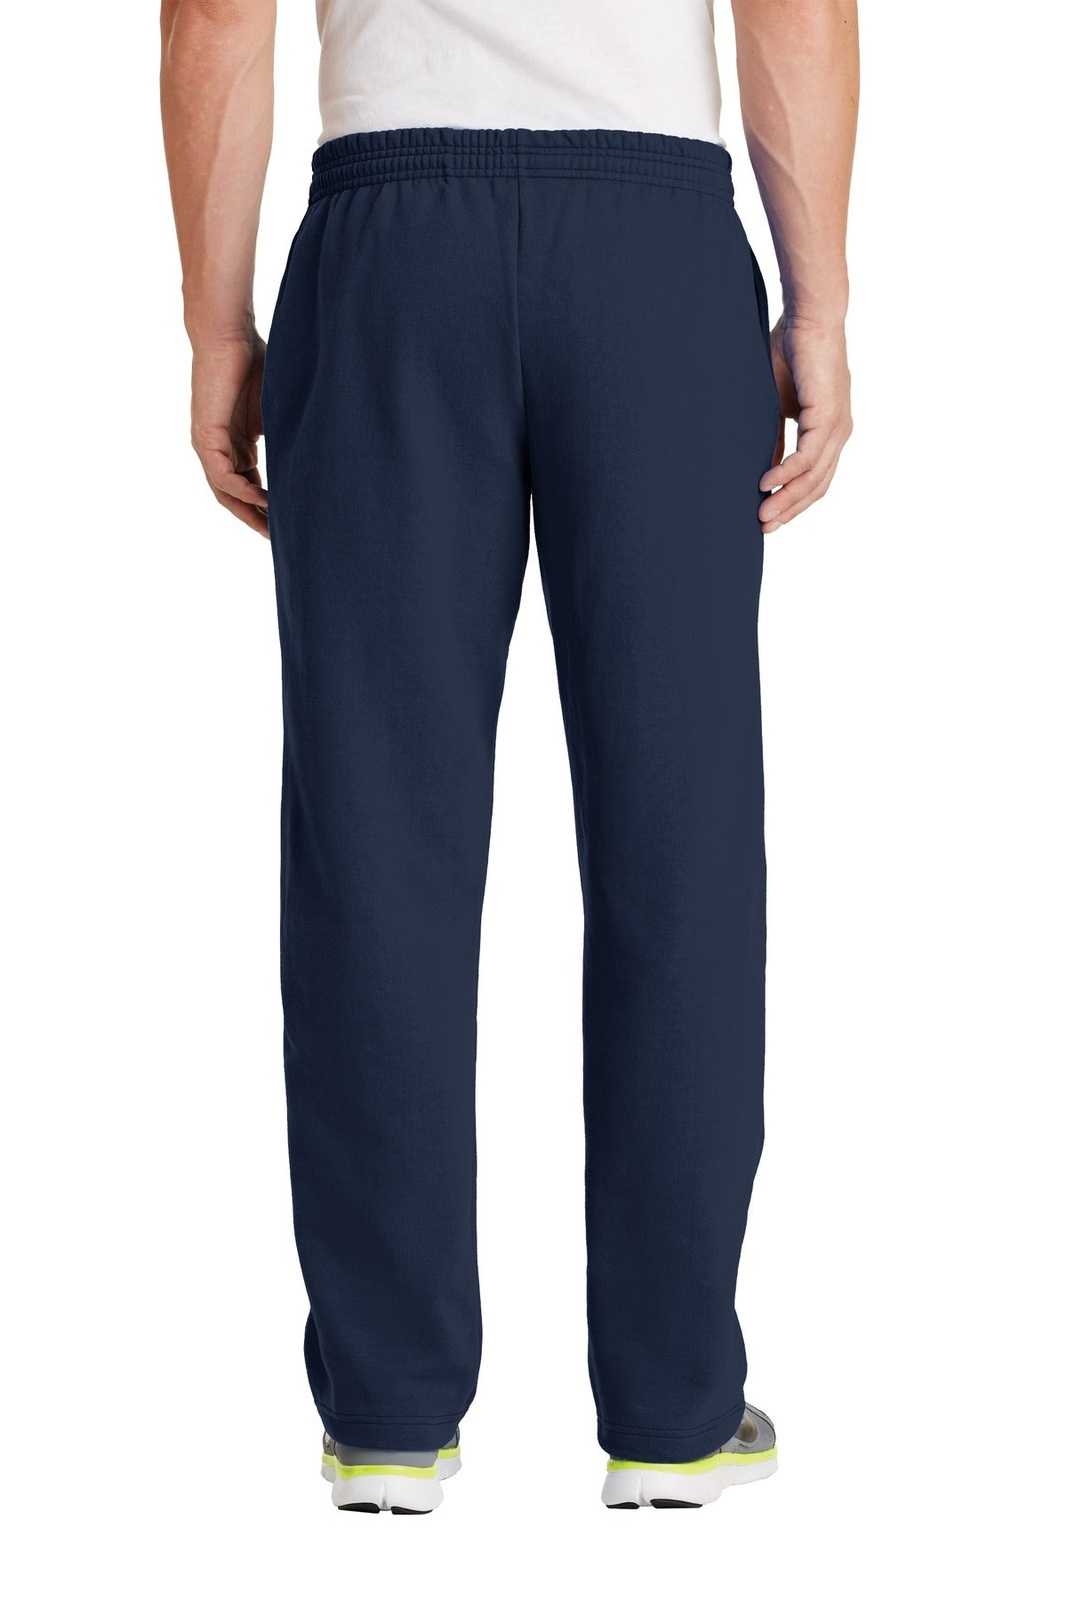 Port &amp; Company PC78P Core Fleece Sweatpant with Pockets - Navy - HIT a Double - 2